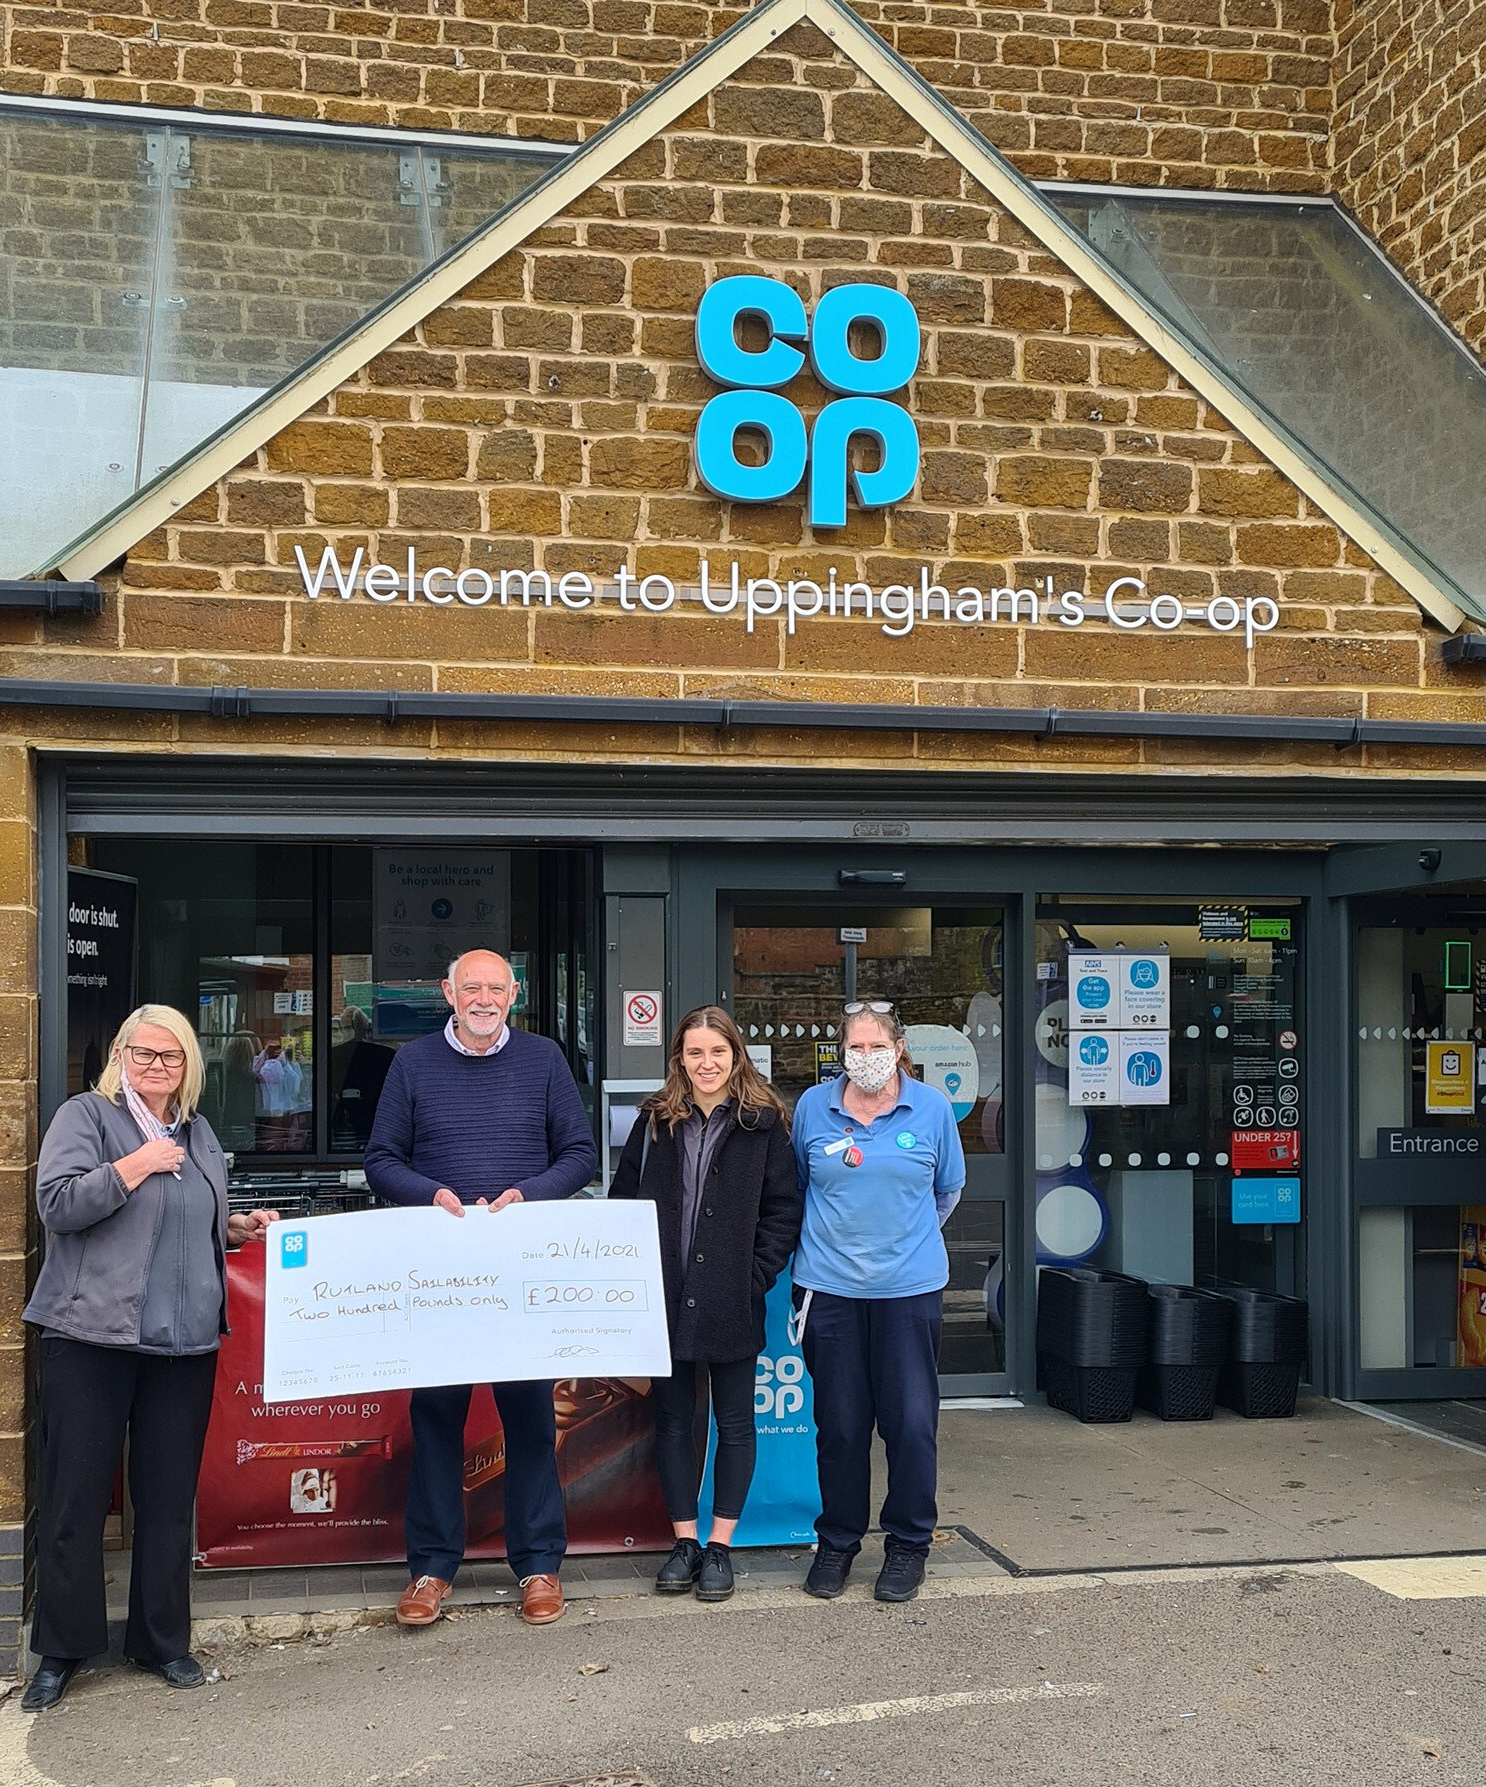 RS are very grateful to receive a donation from Uppingham Co-op